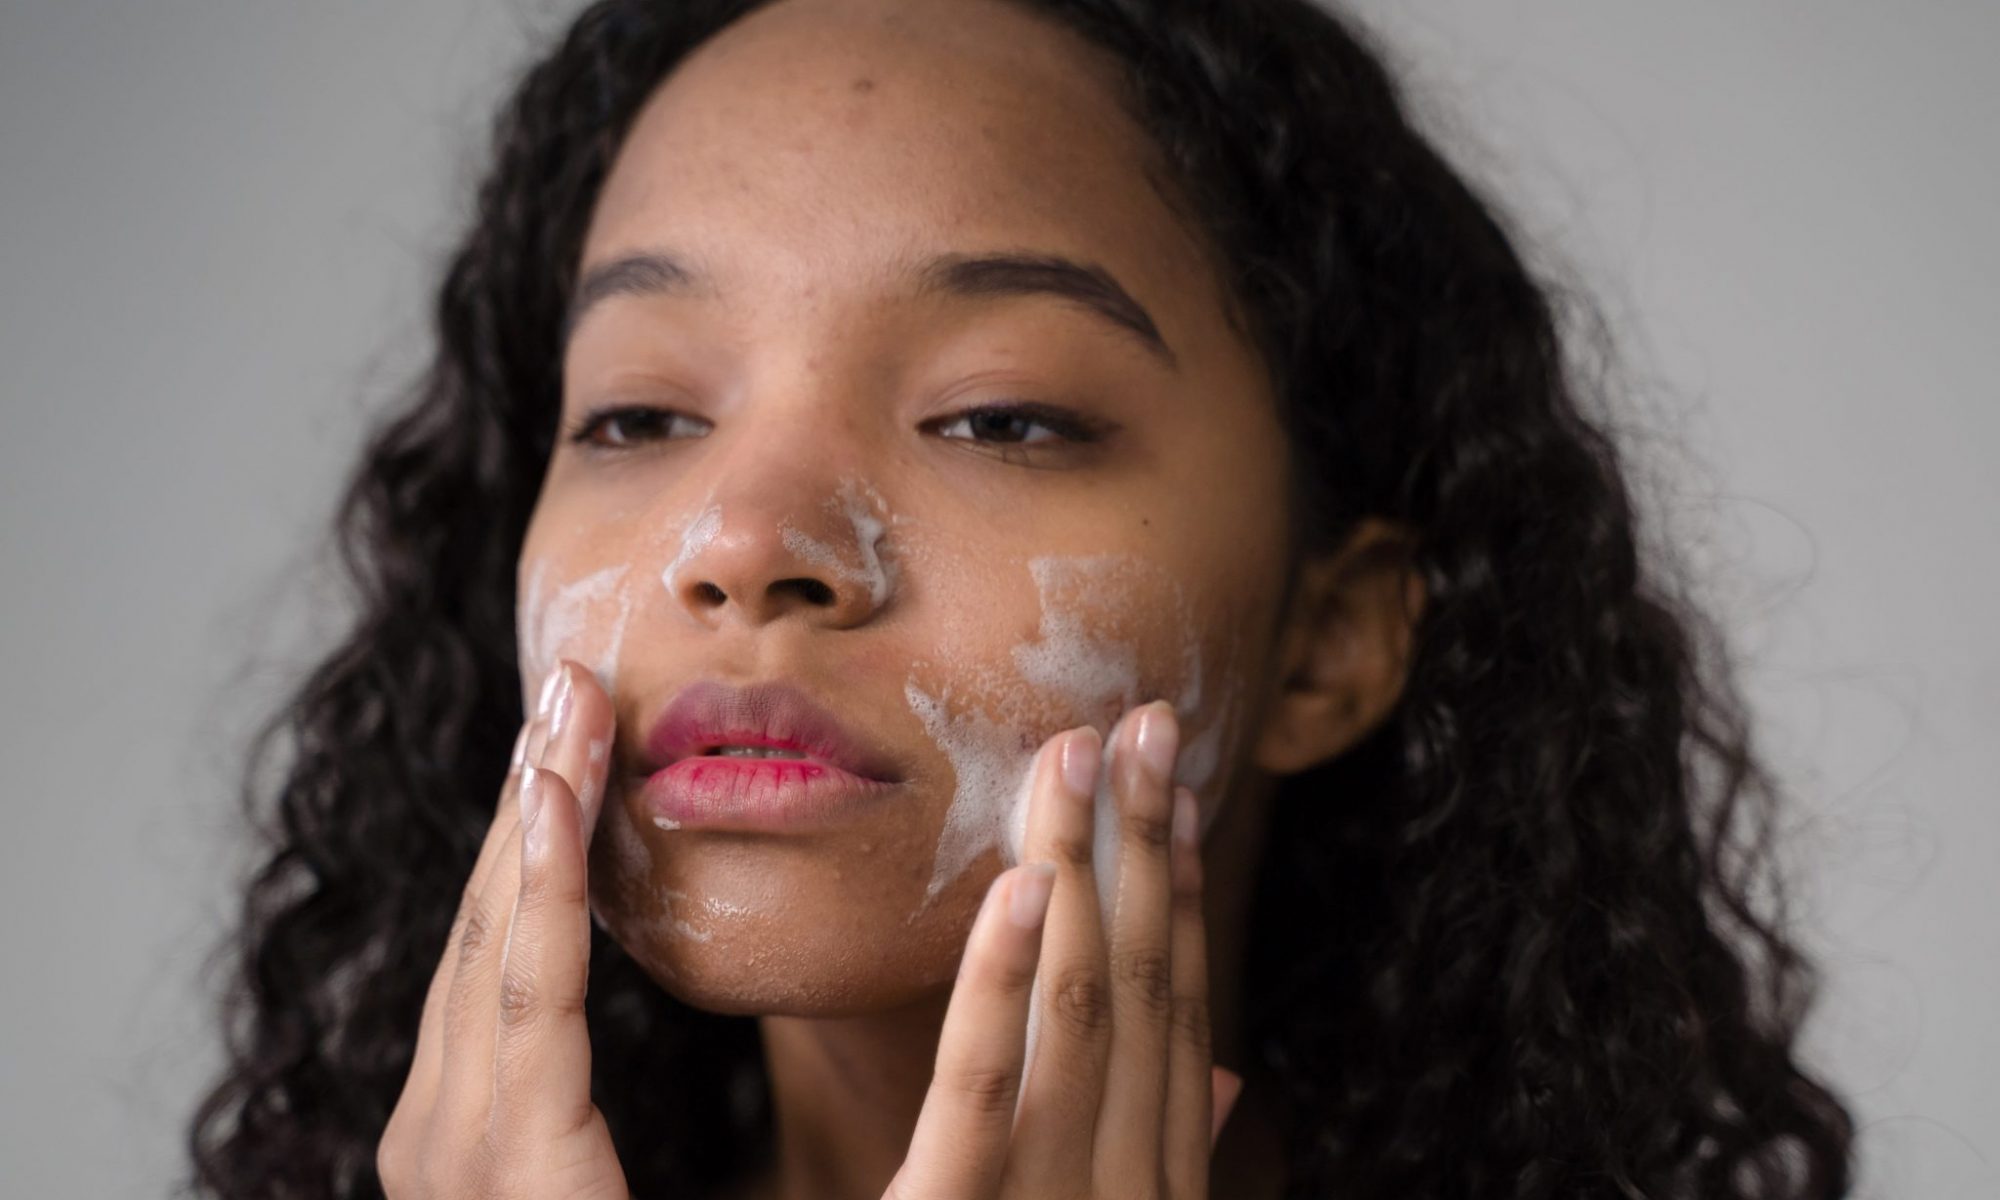 All-important facial cleansing tips